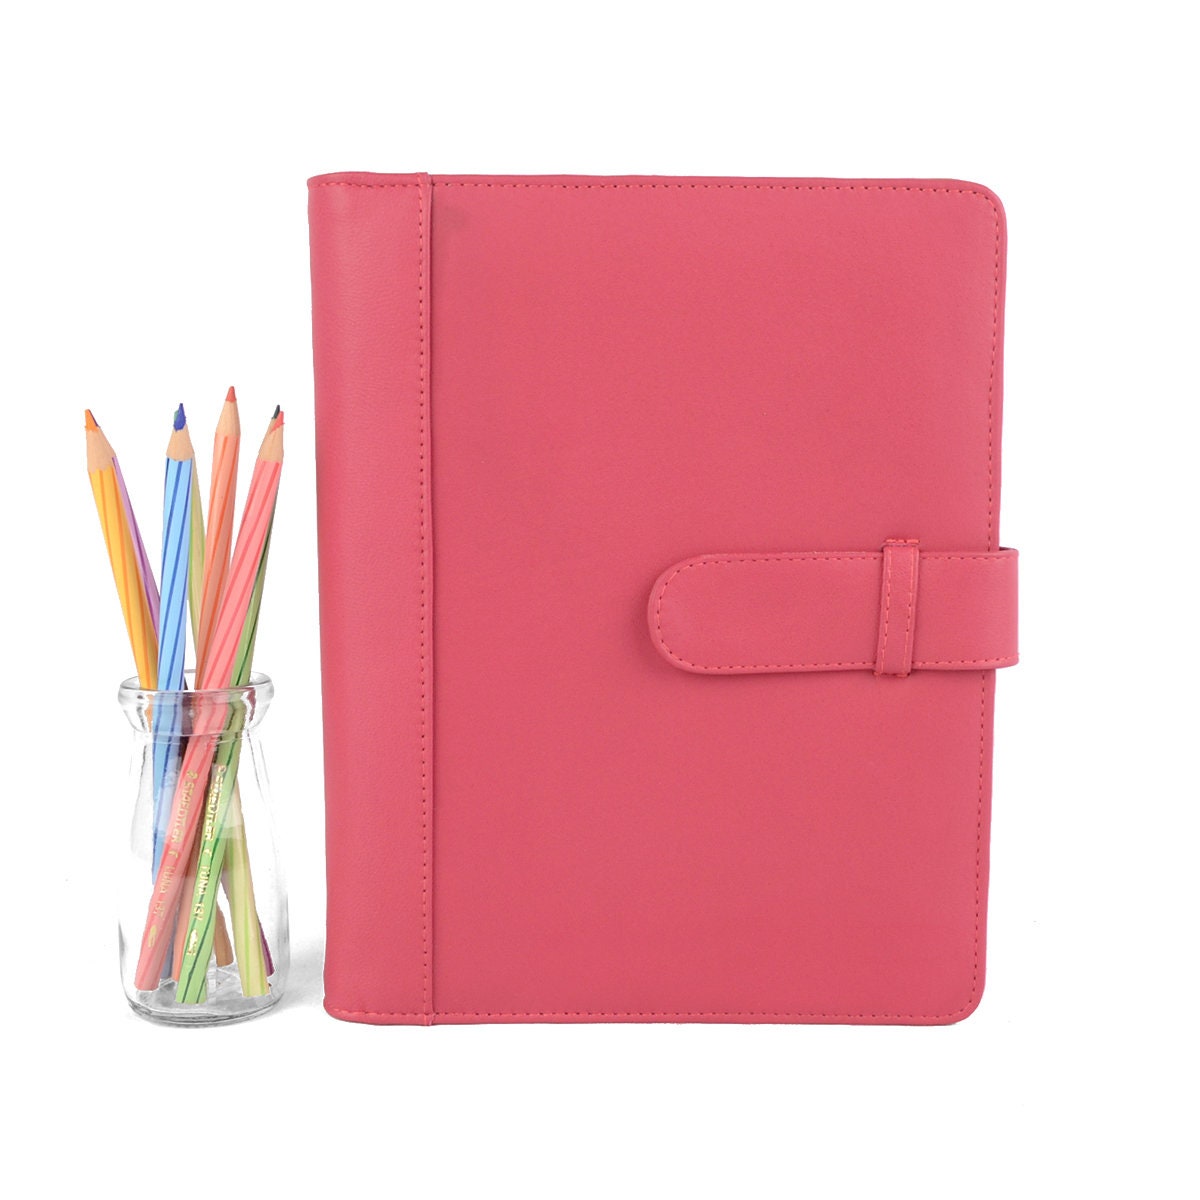 Coach, Office, Coach Red Patent Leather Zippered 6x8 Planner Agenda  Notepad Holder